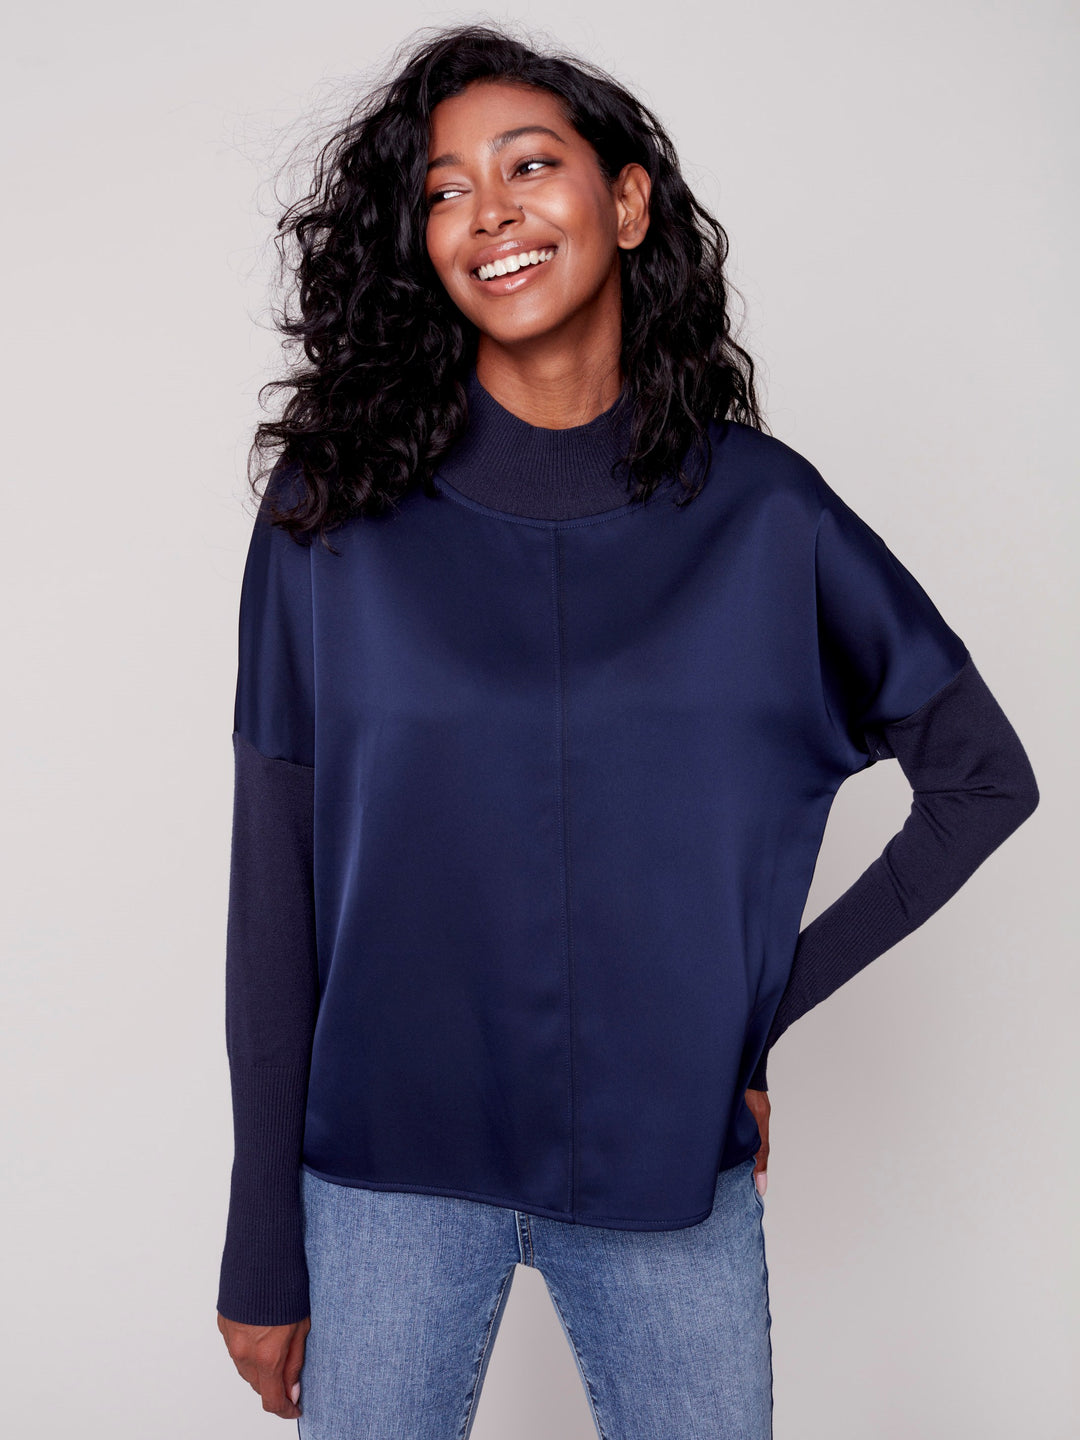 Charlie B Satin Top With Knit Combo Mock-Neck And Sleeves